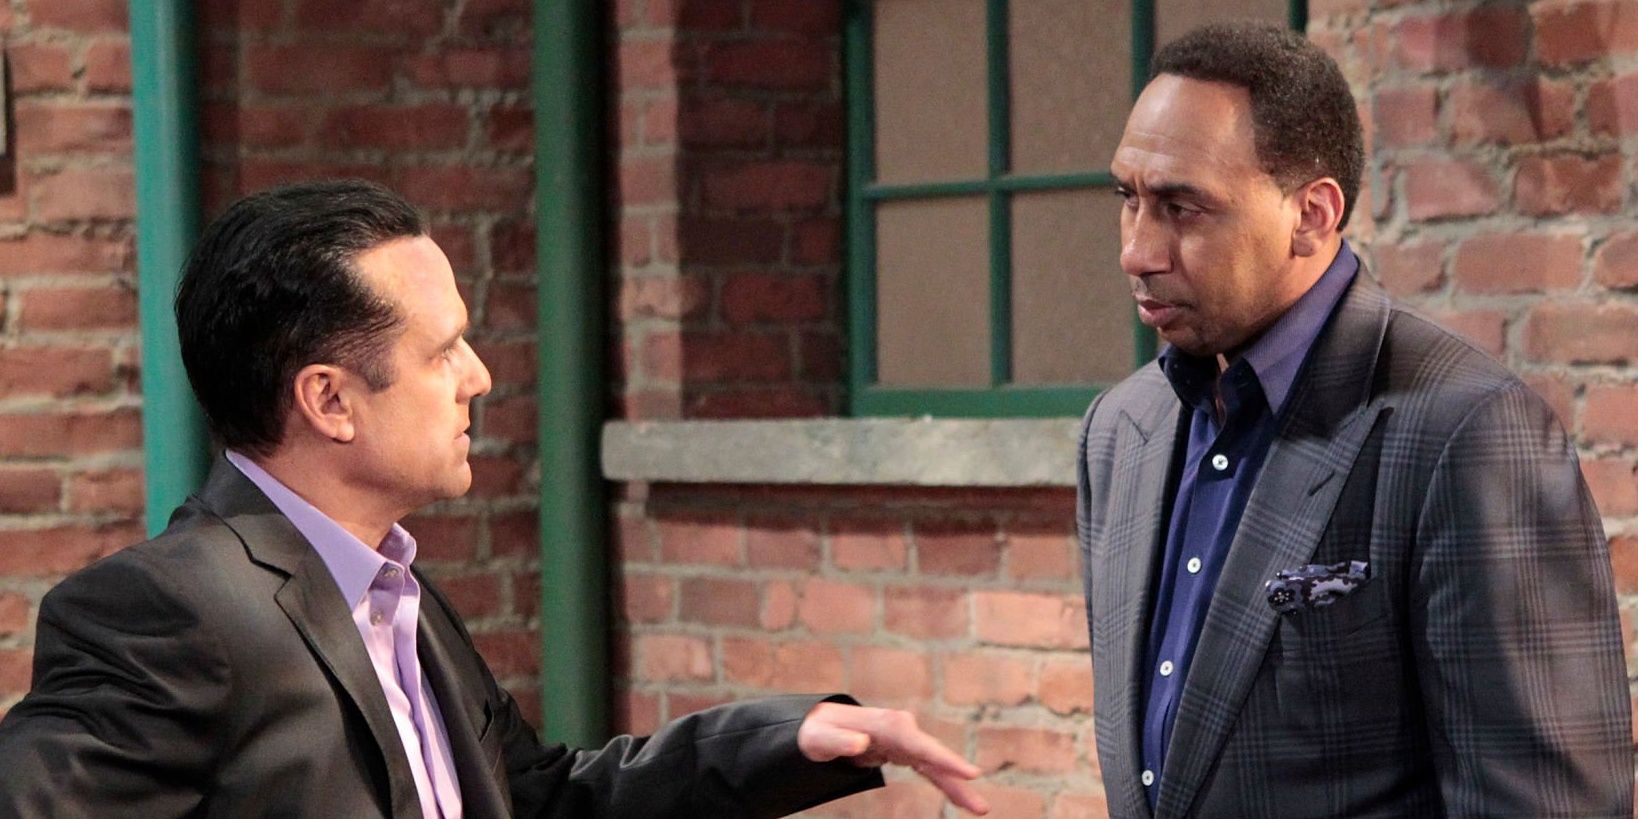 Stephen A. Smith and Maurice Benard on General Hospital